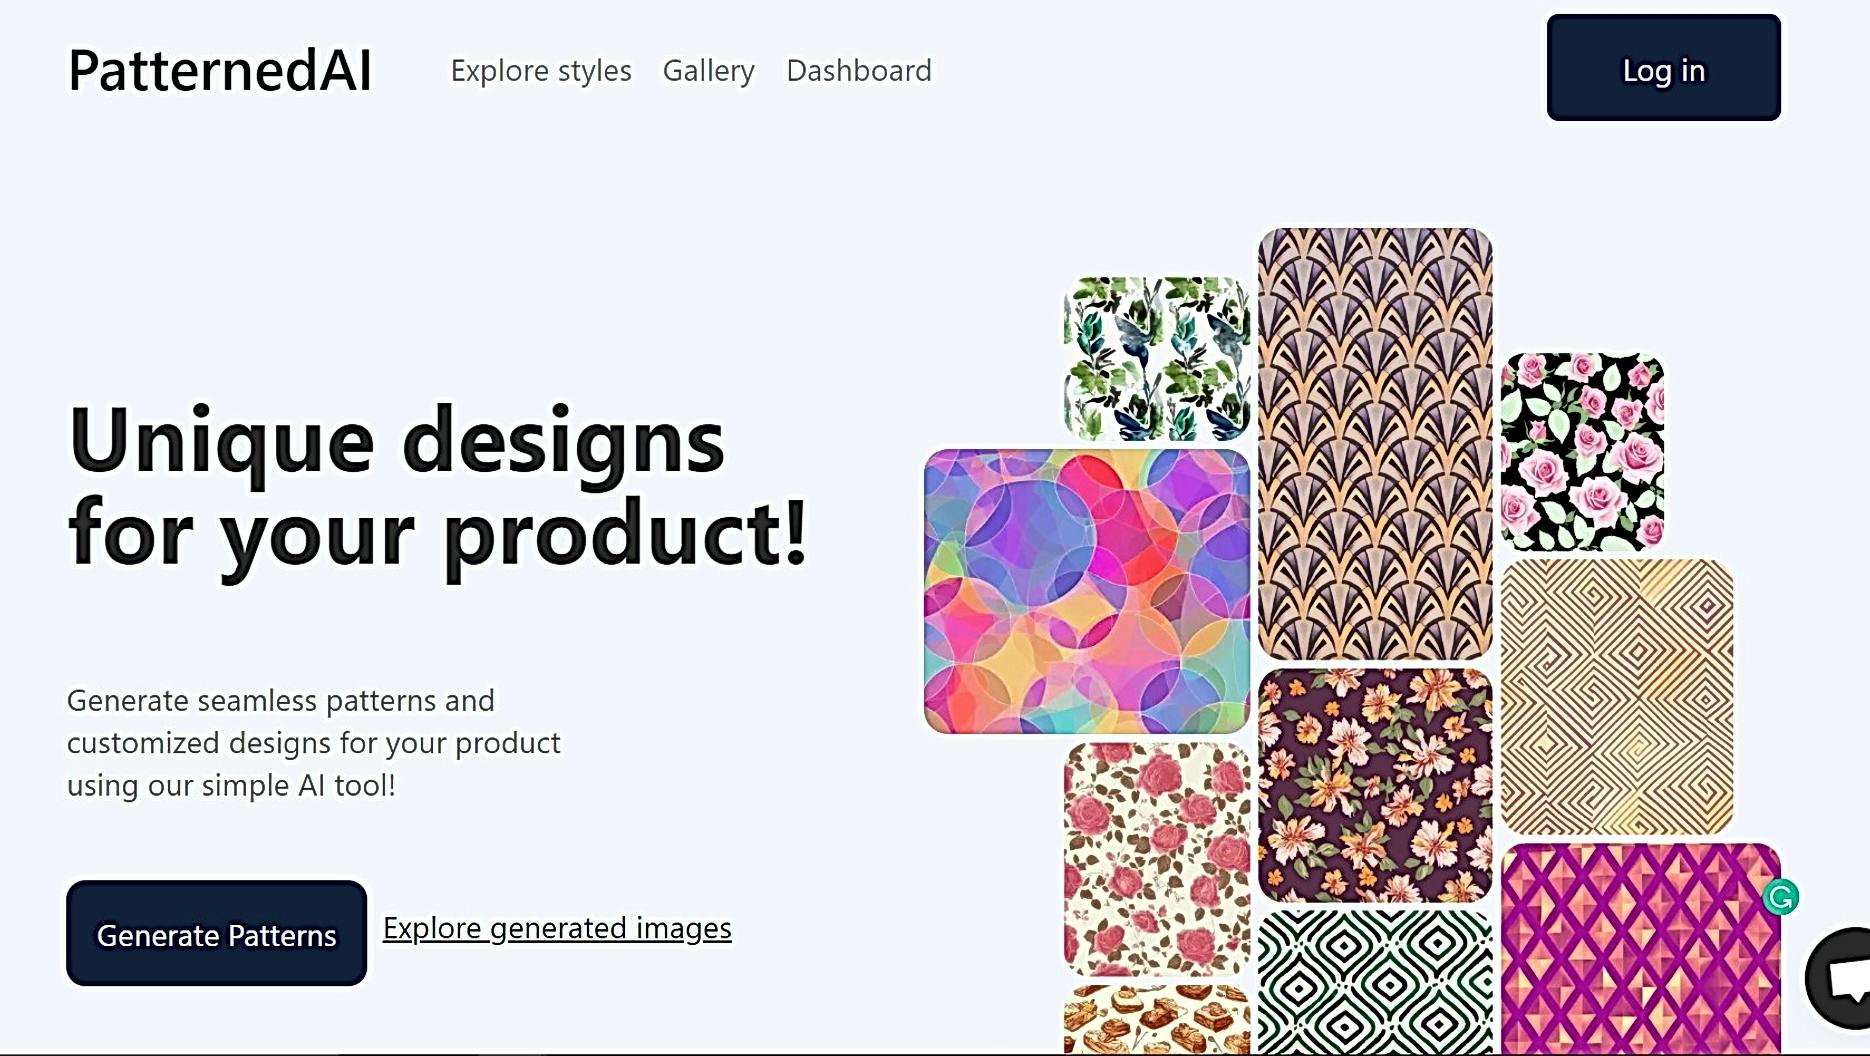 Patterned AI featured